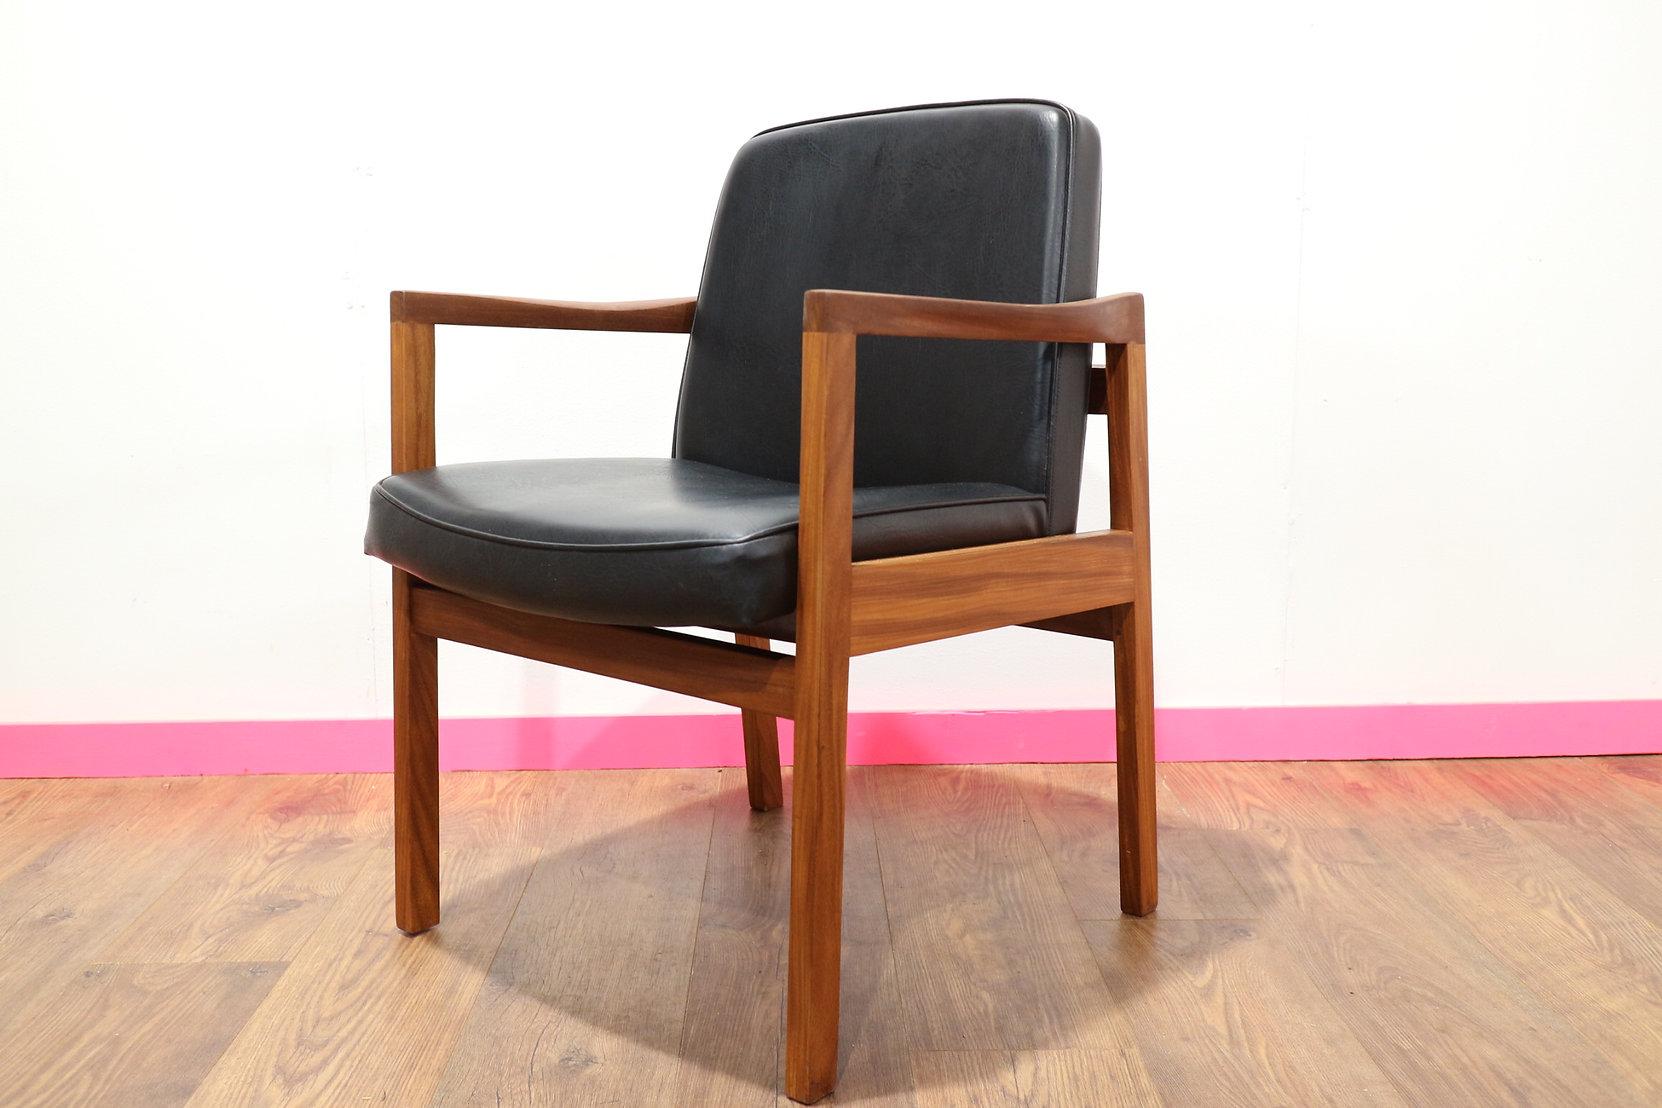 A beautiful carver office chair with a vinly leatherette cushioned seat and gorgeouse sculpted arms. This British chair was made in the 1960s and is in fantastic shape. 

 

Dimensions 

w23 d24 h32

Seat height 18 Arm height